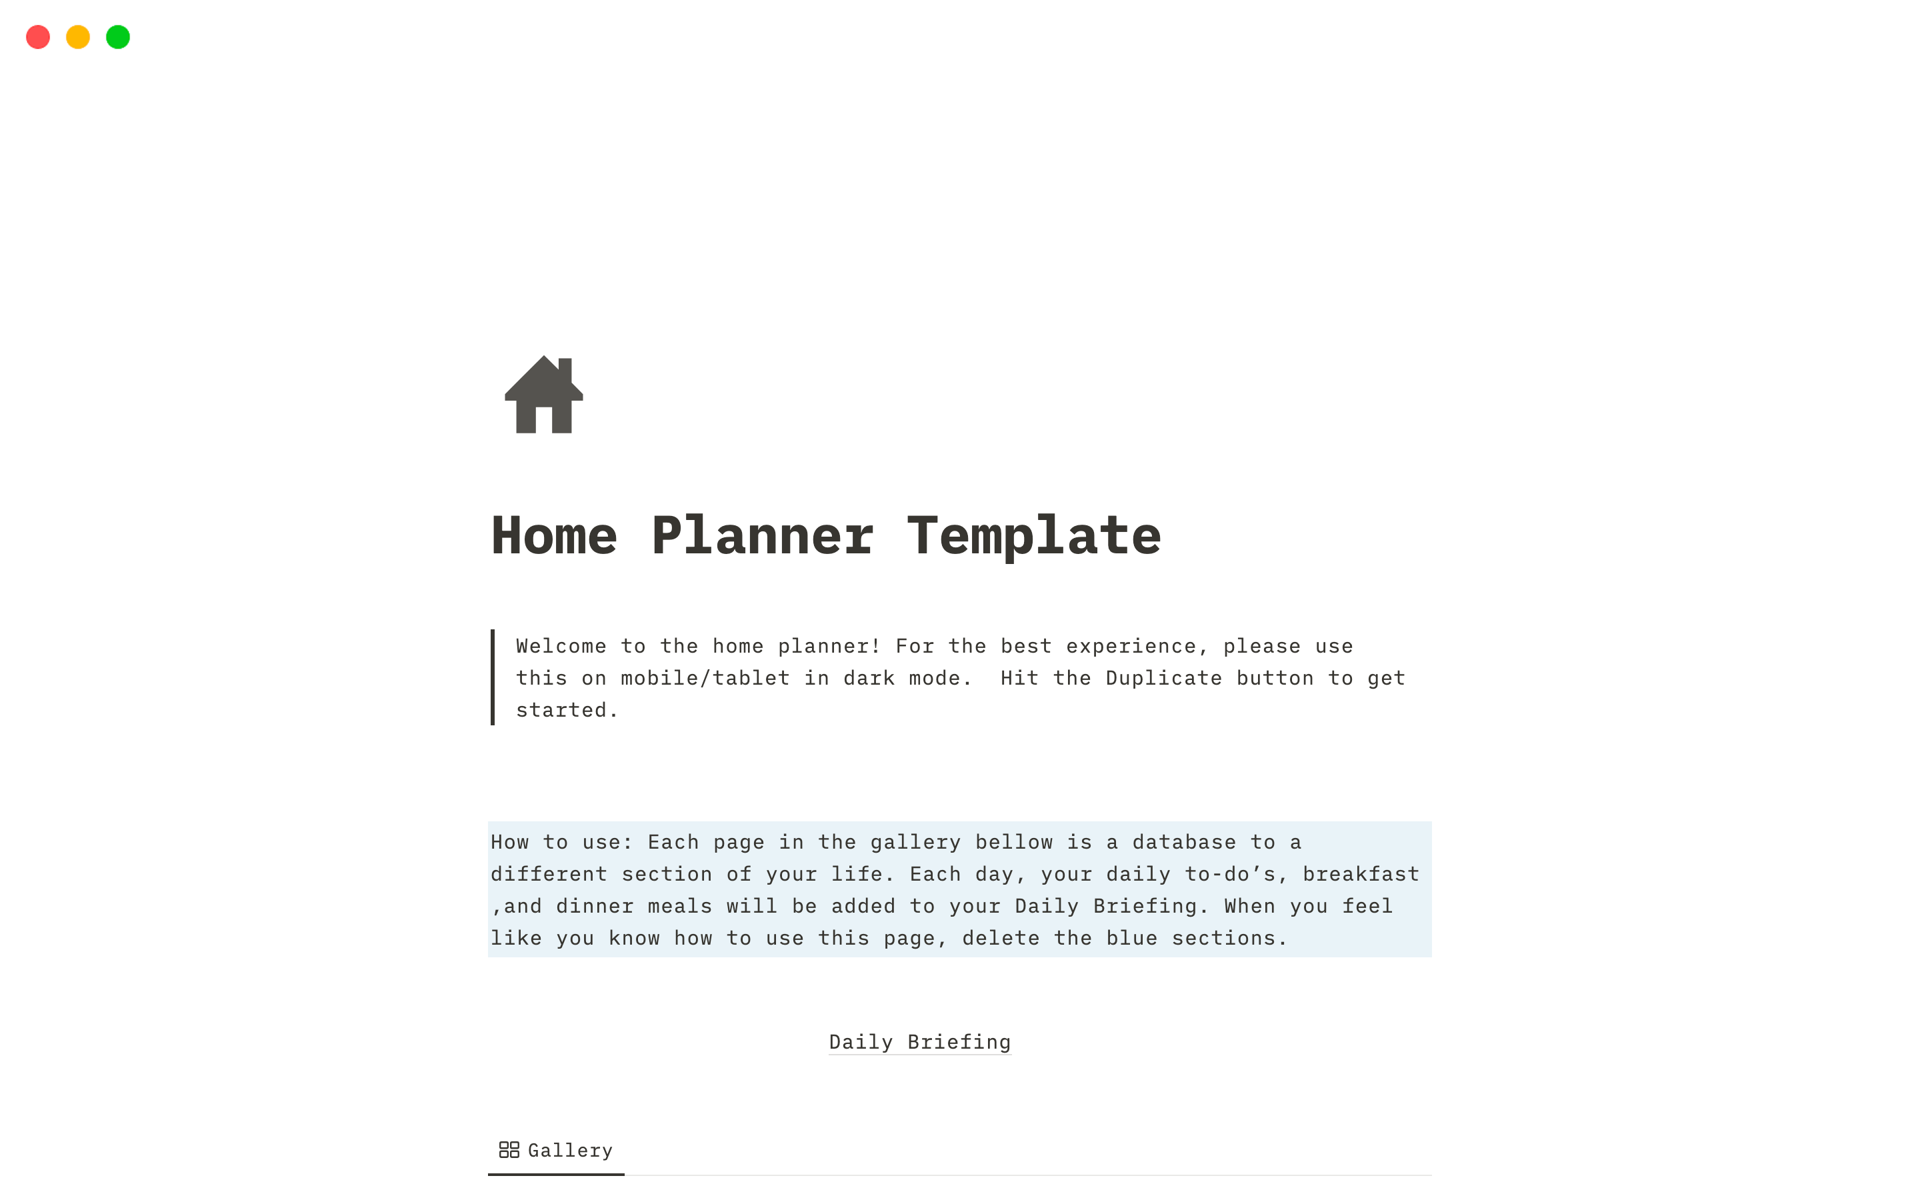 Your new home planner is here - plan your meals, your to dos, and even find new recipes. 